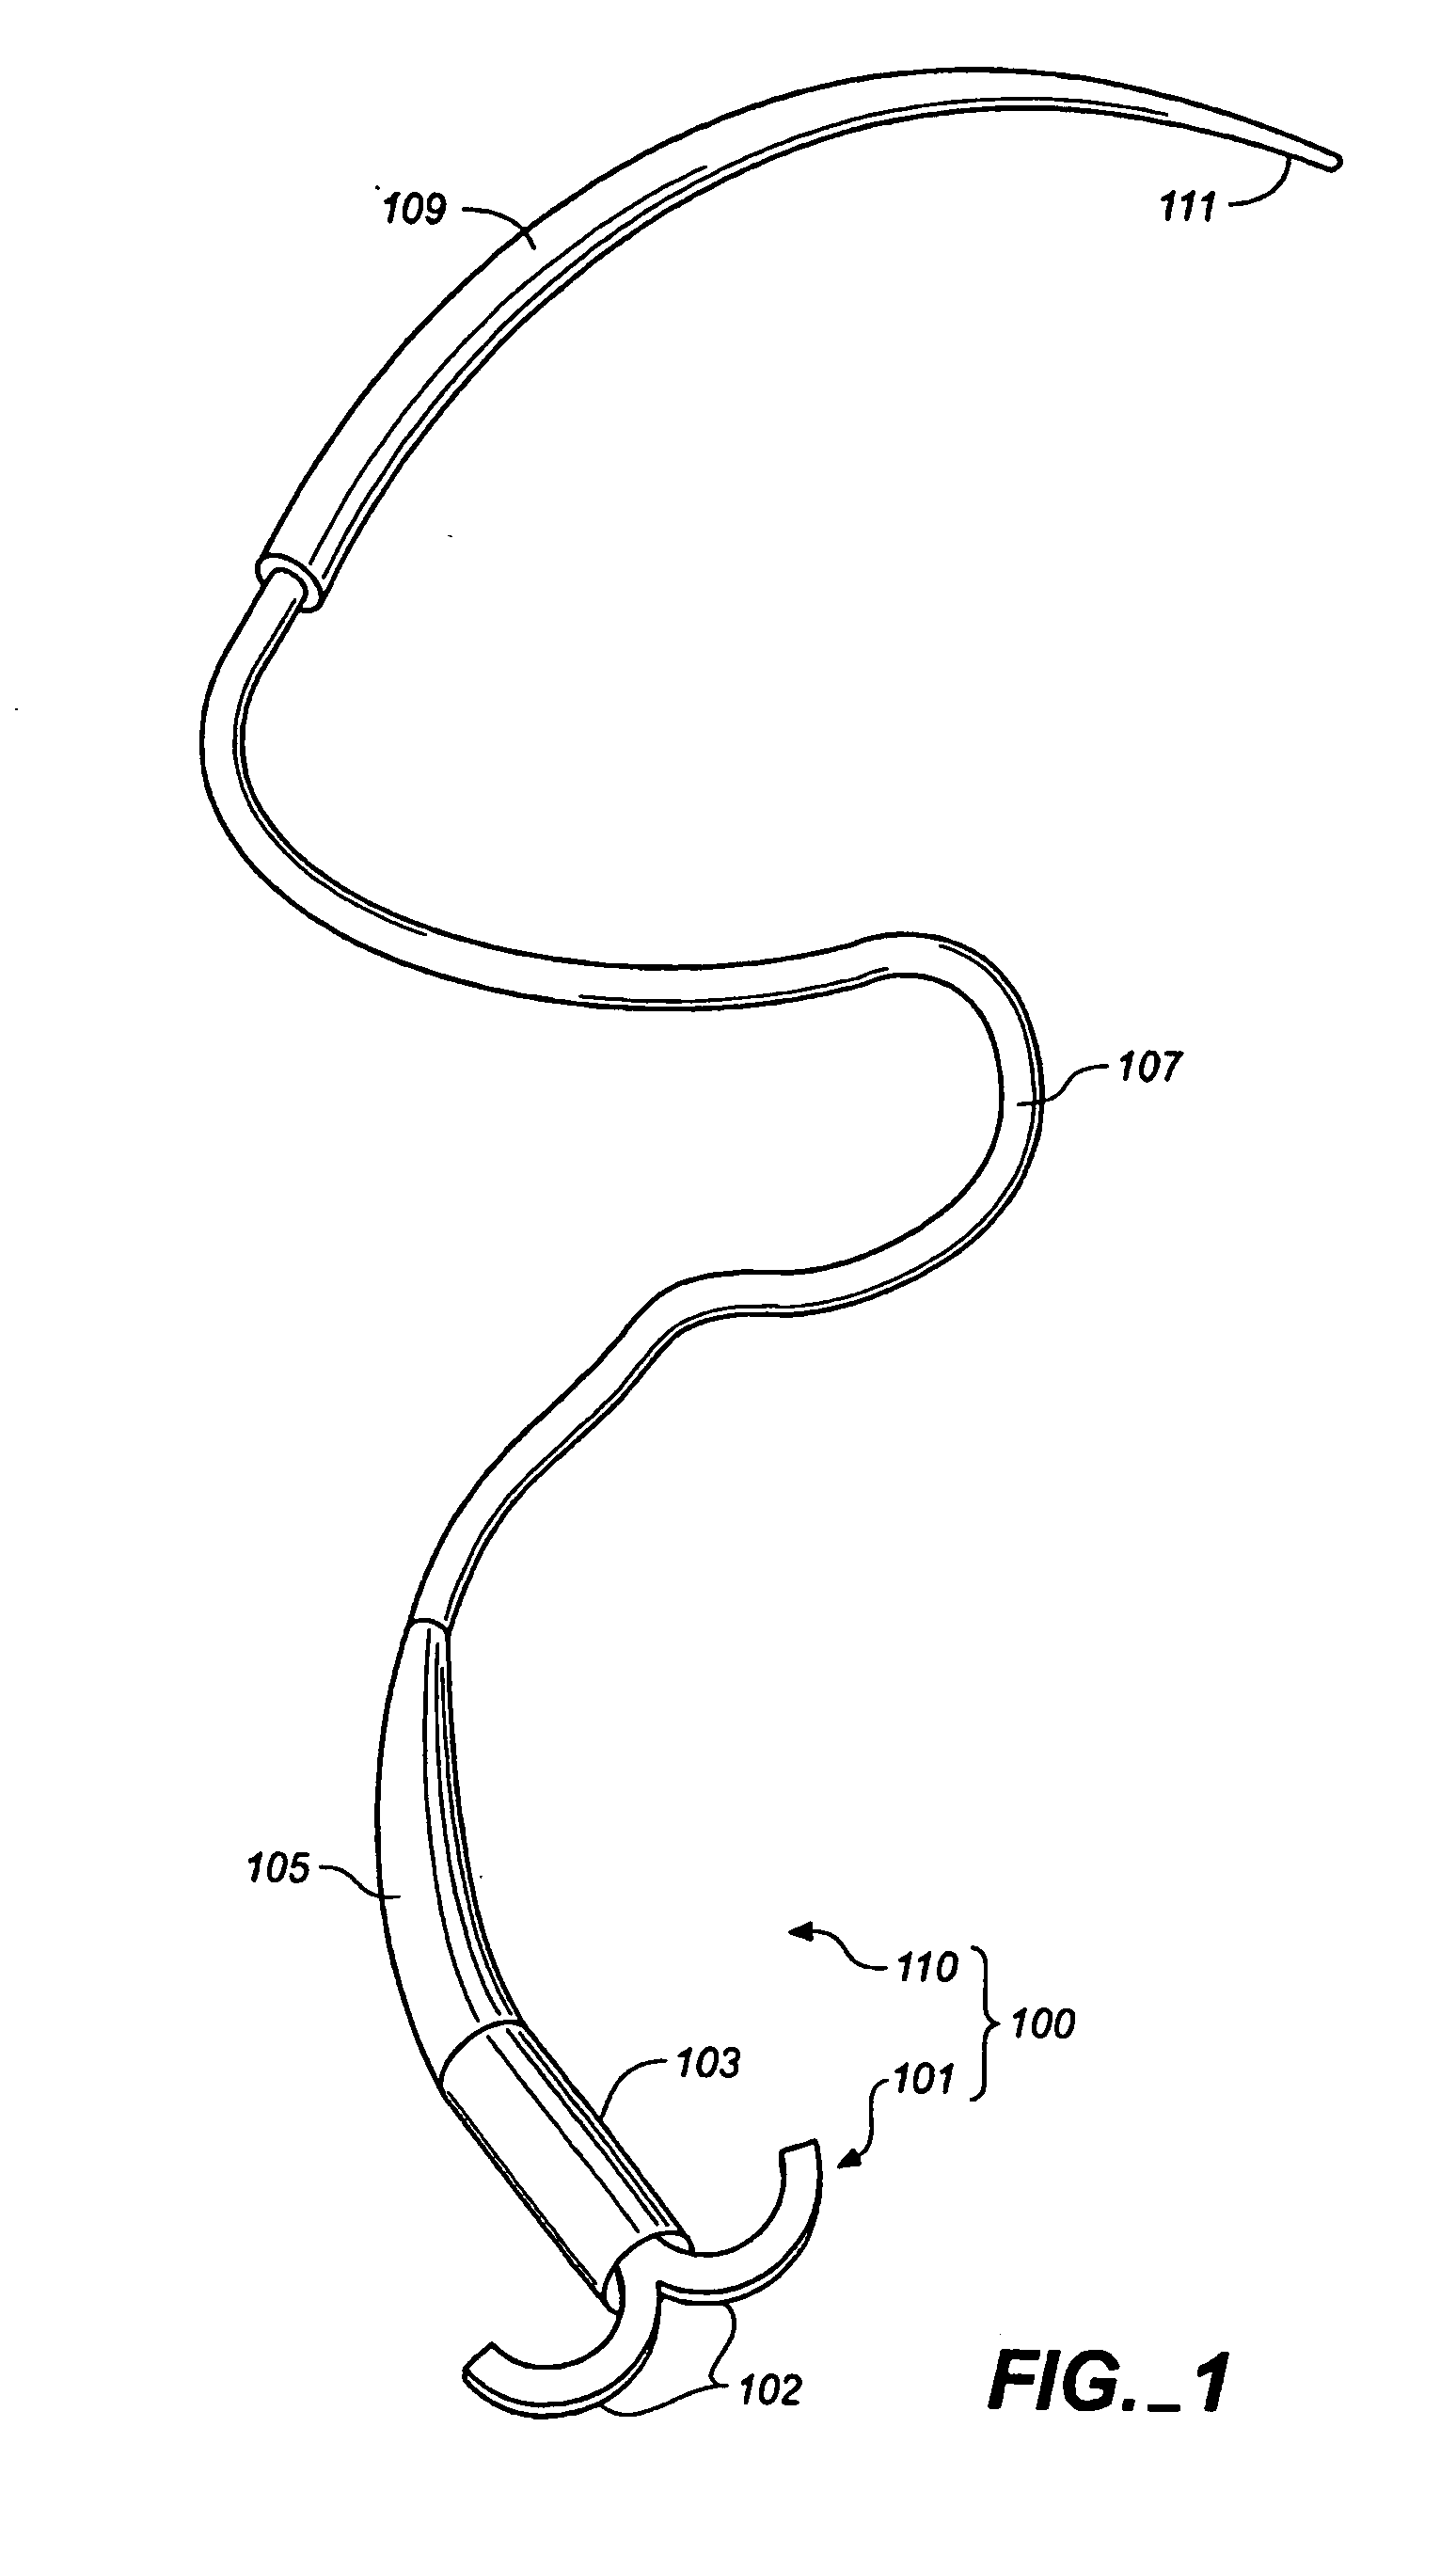 Self-closing surgical clip for tissue